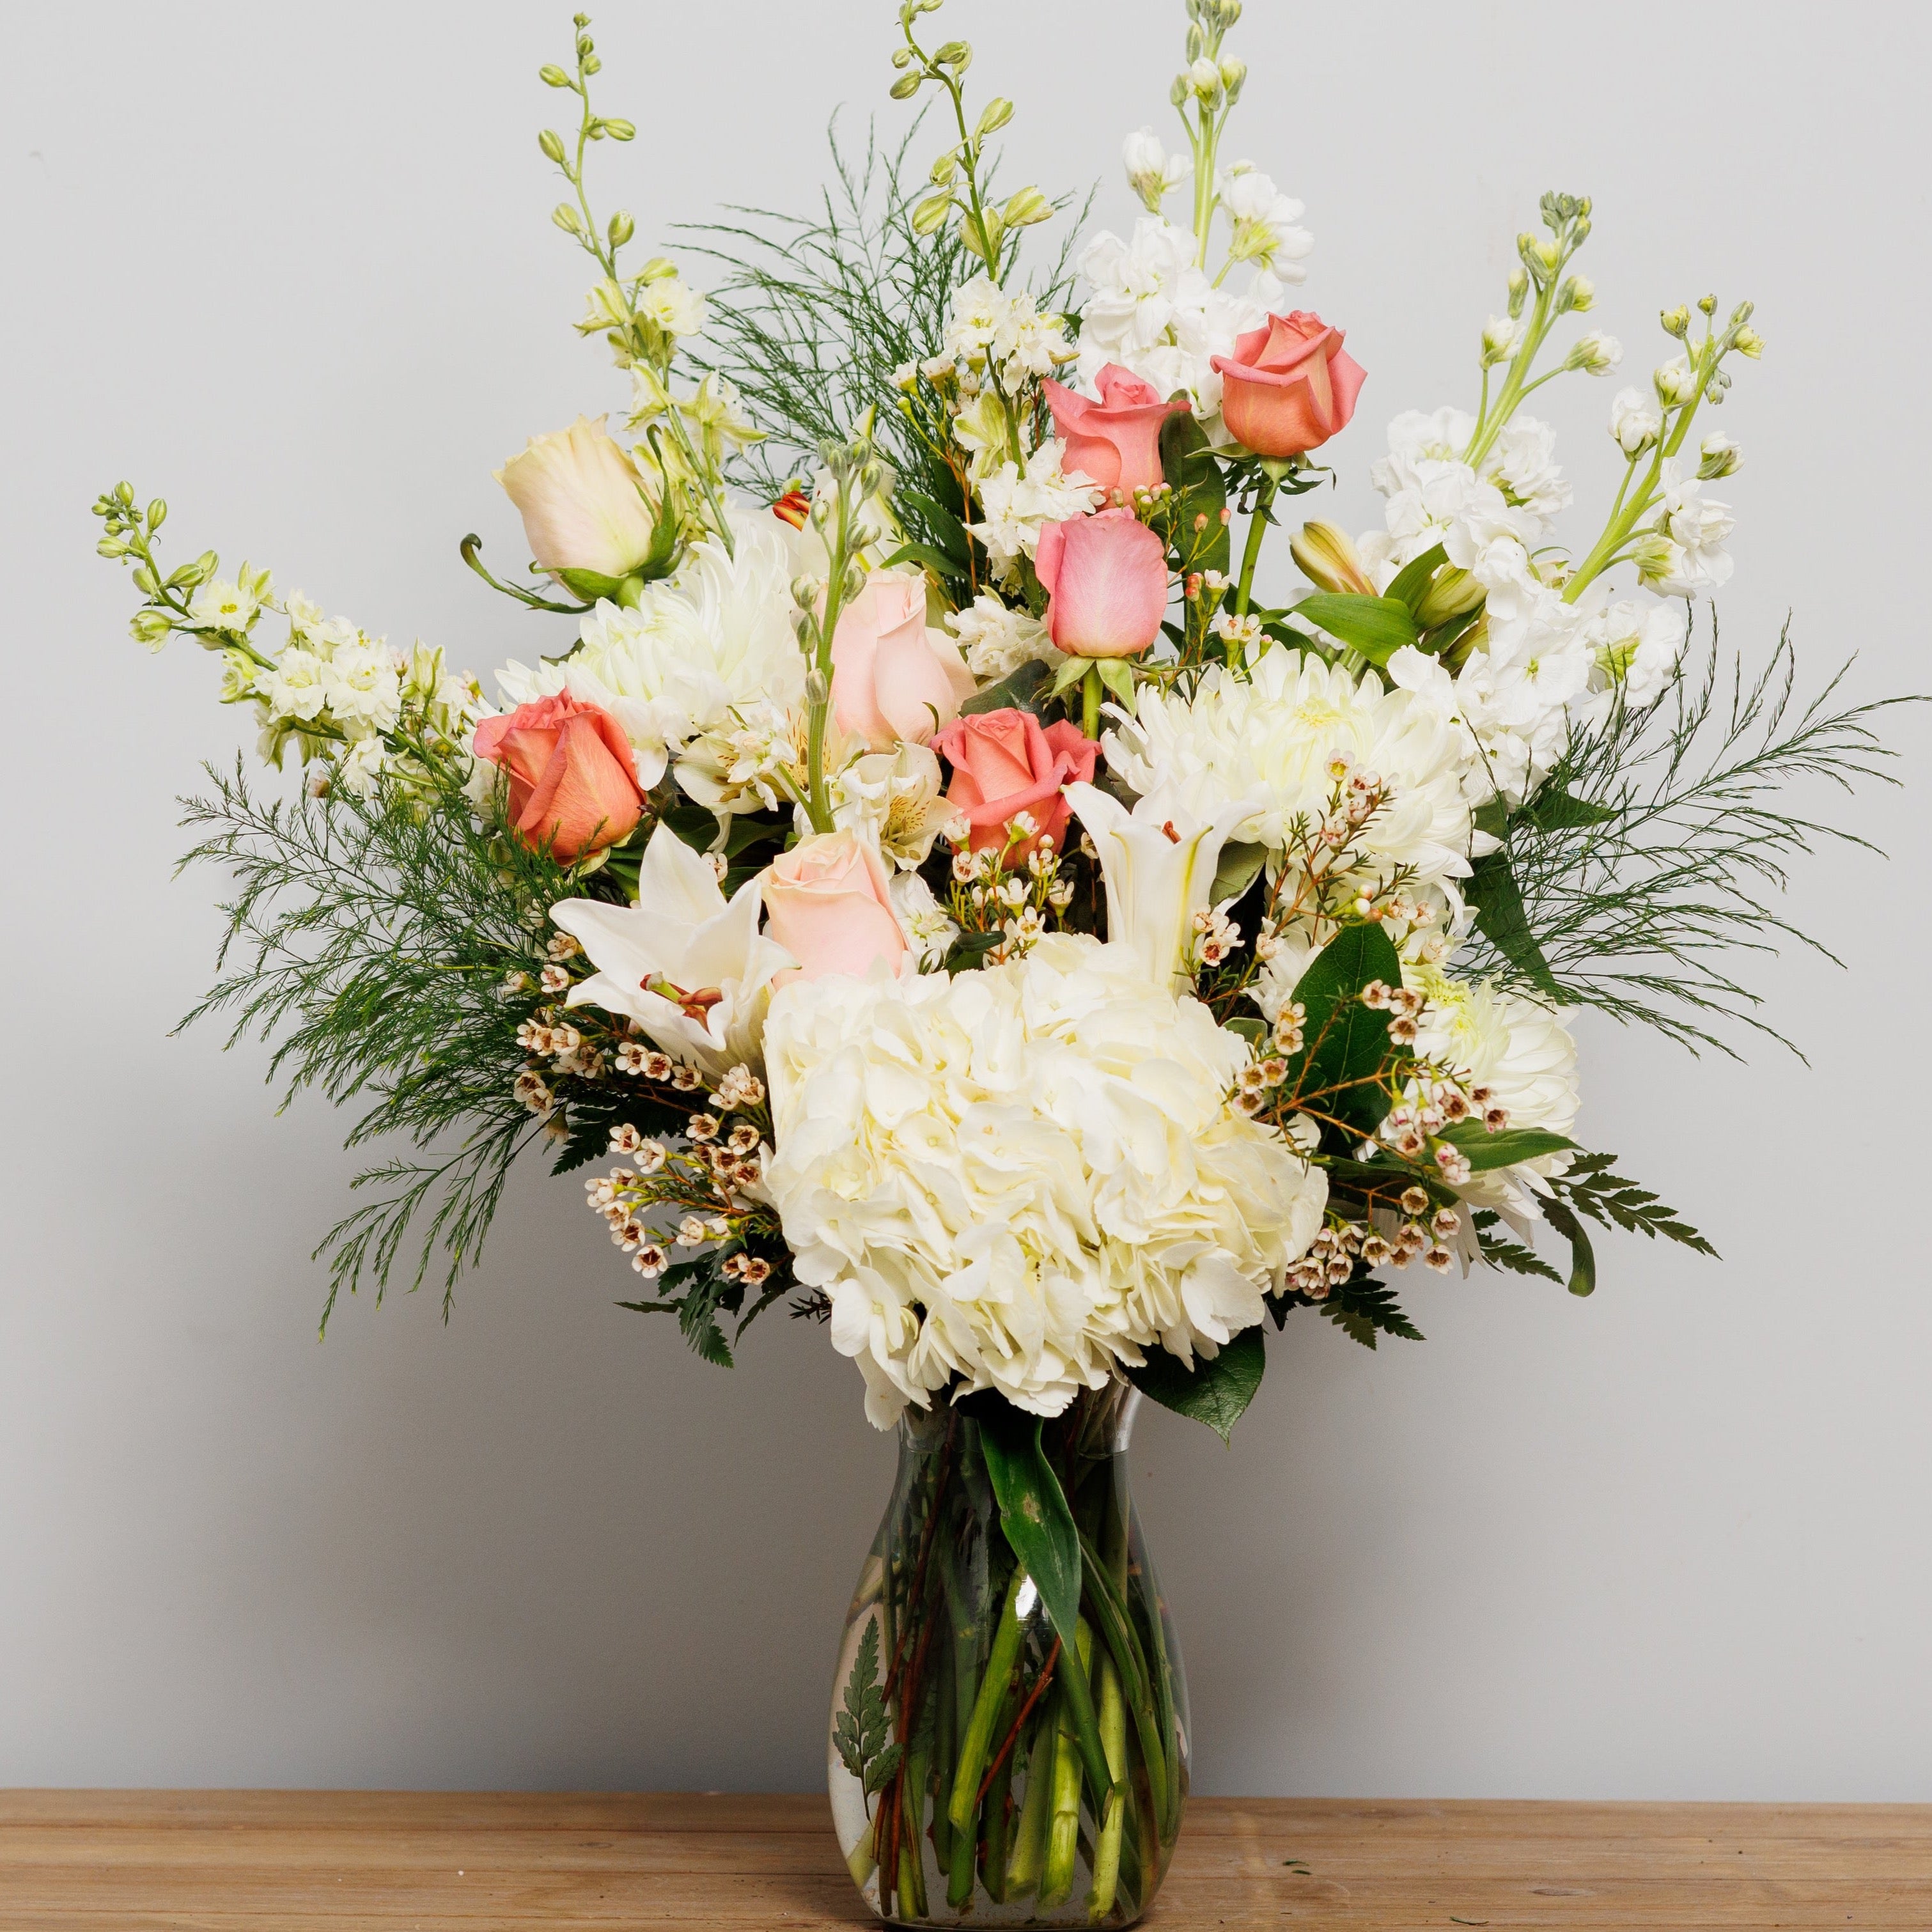 A vase arrangement with a white hydrangea, mauve roses and other white flowers.